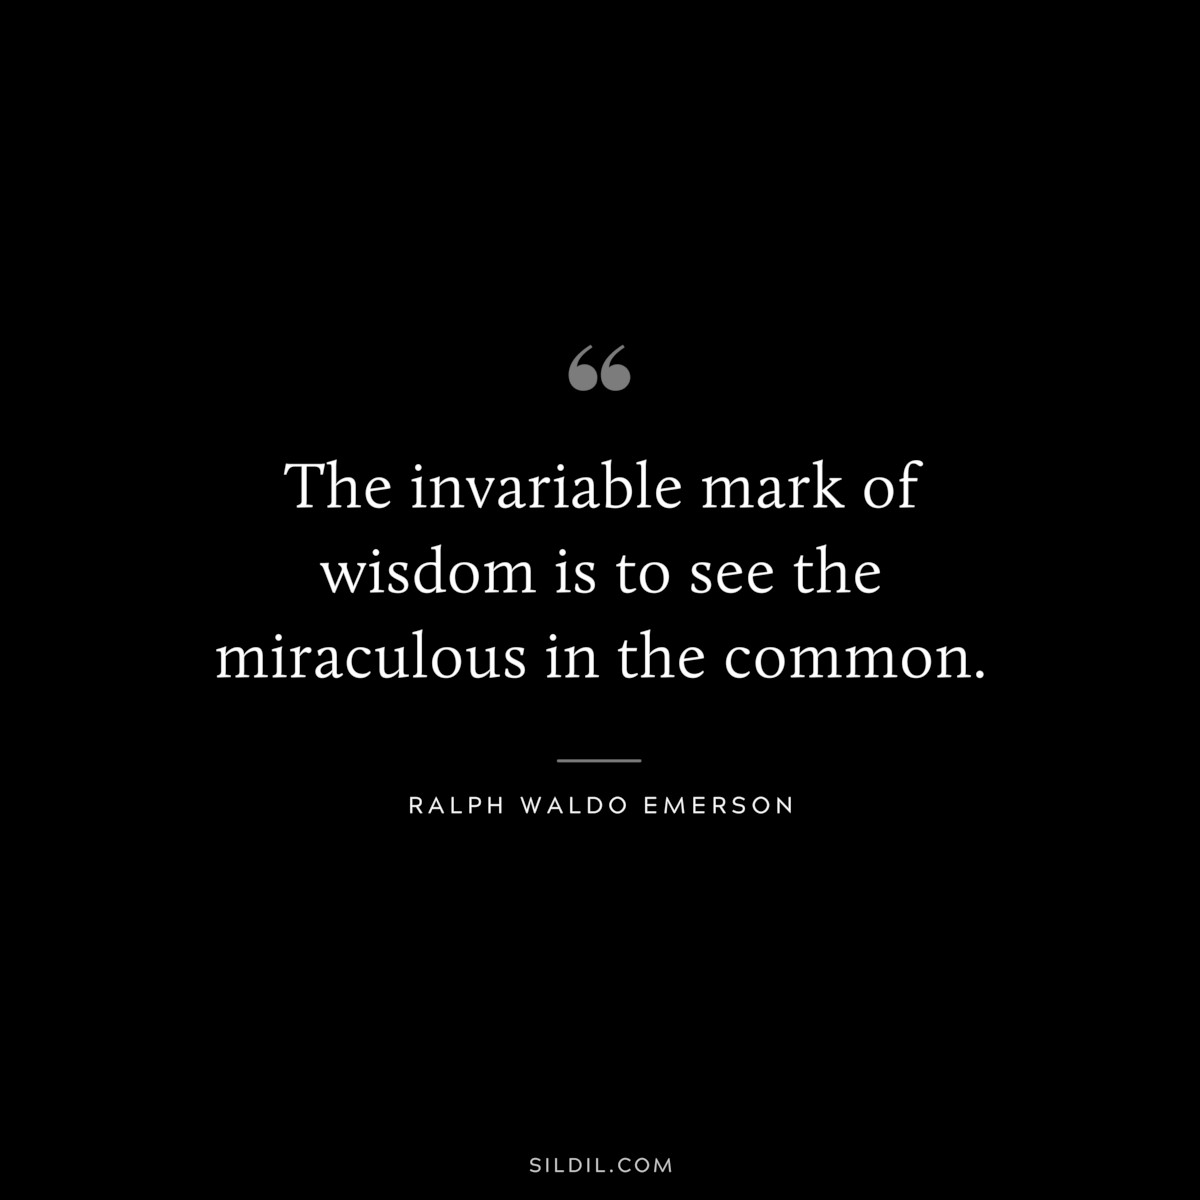 The invariable mark of wisdom is to see the miraculous in the common. — Ralph Waldo Emerson